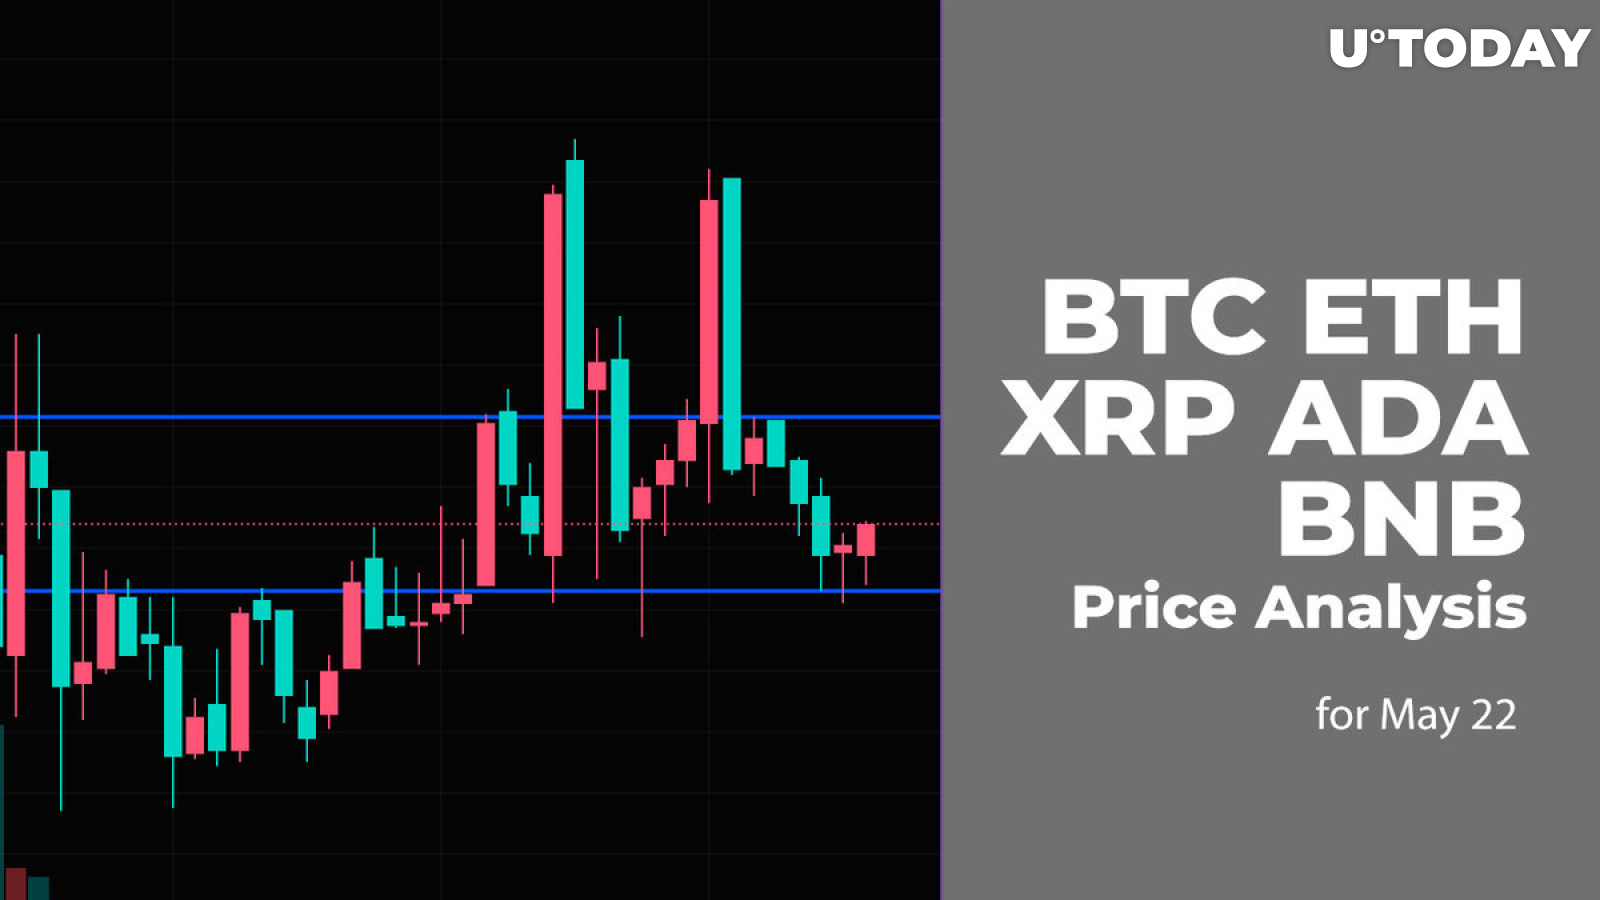 BTC, ETH, XRP, ADA and BNB Price Analysis for May 22